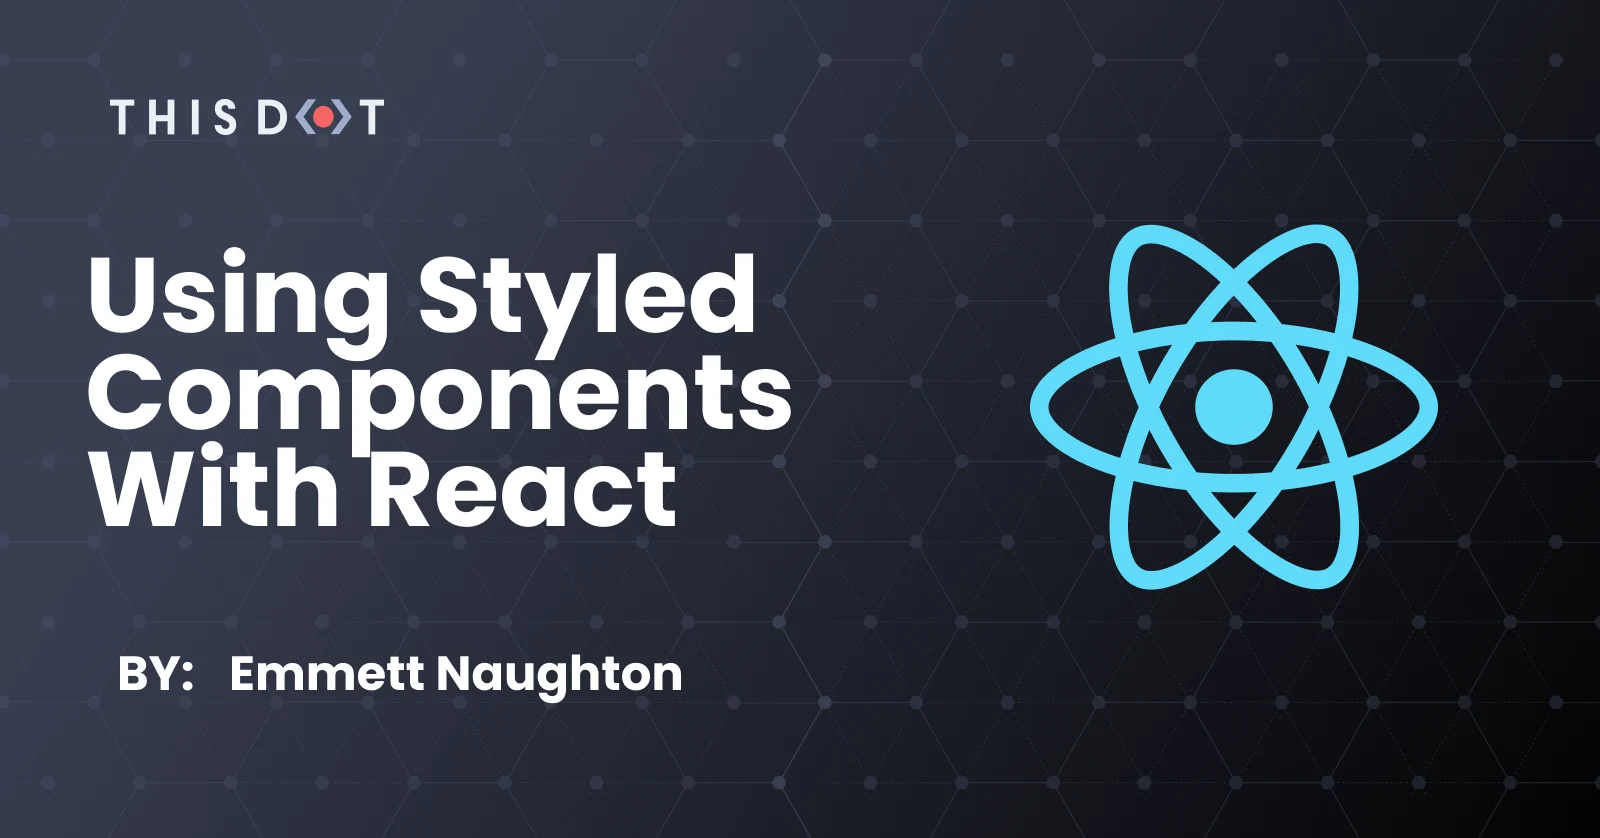 Using Styled Components with React  cover image